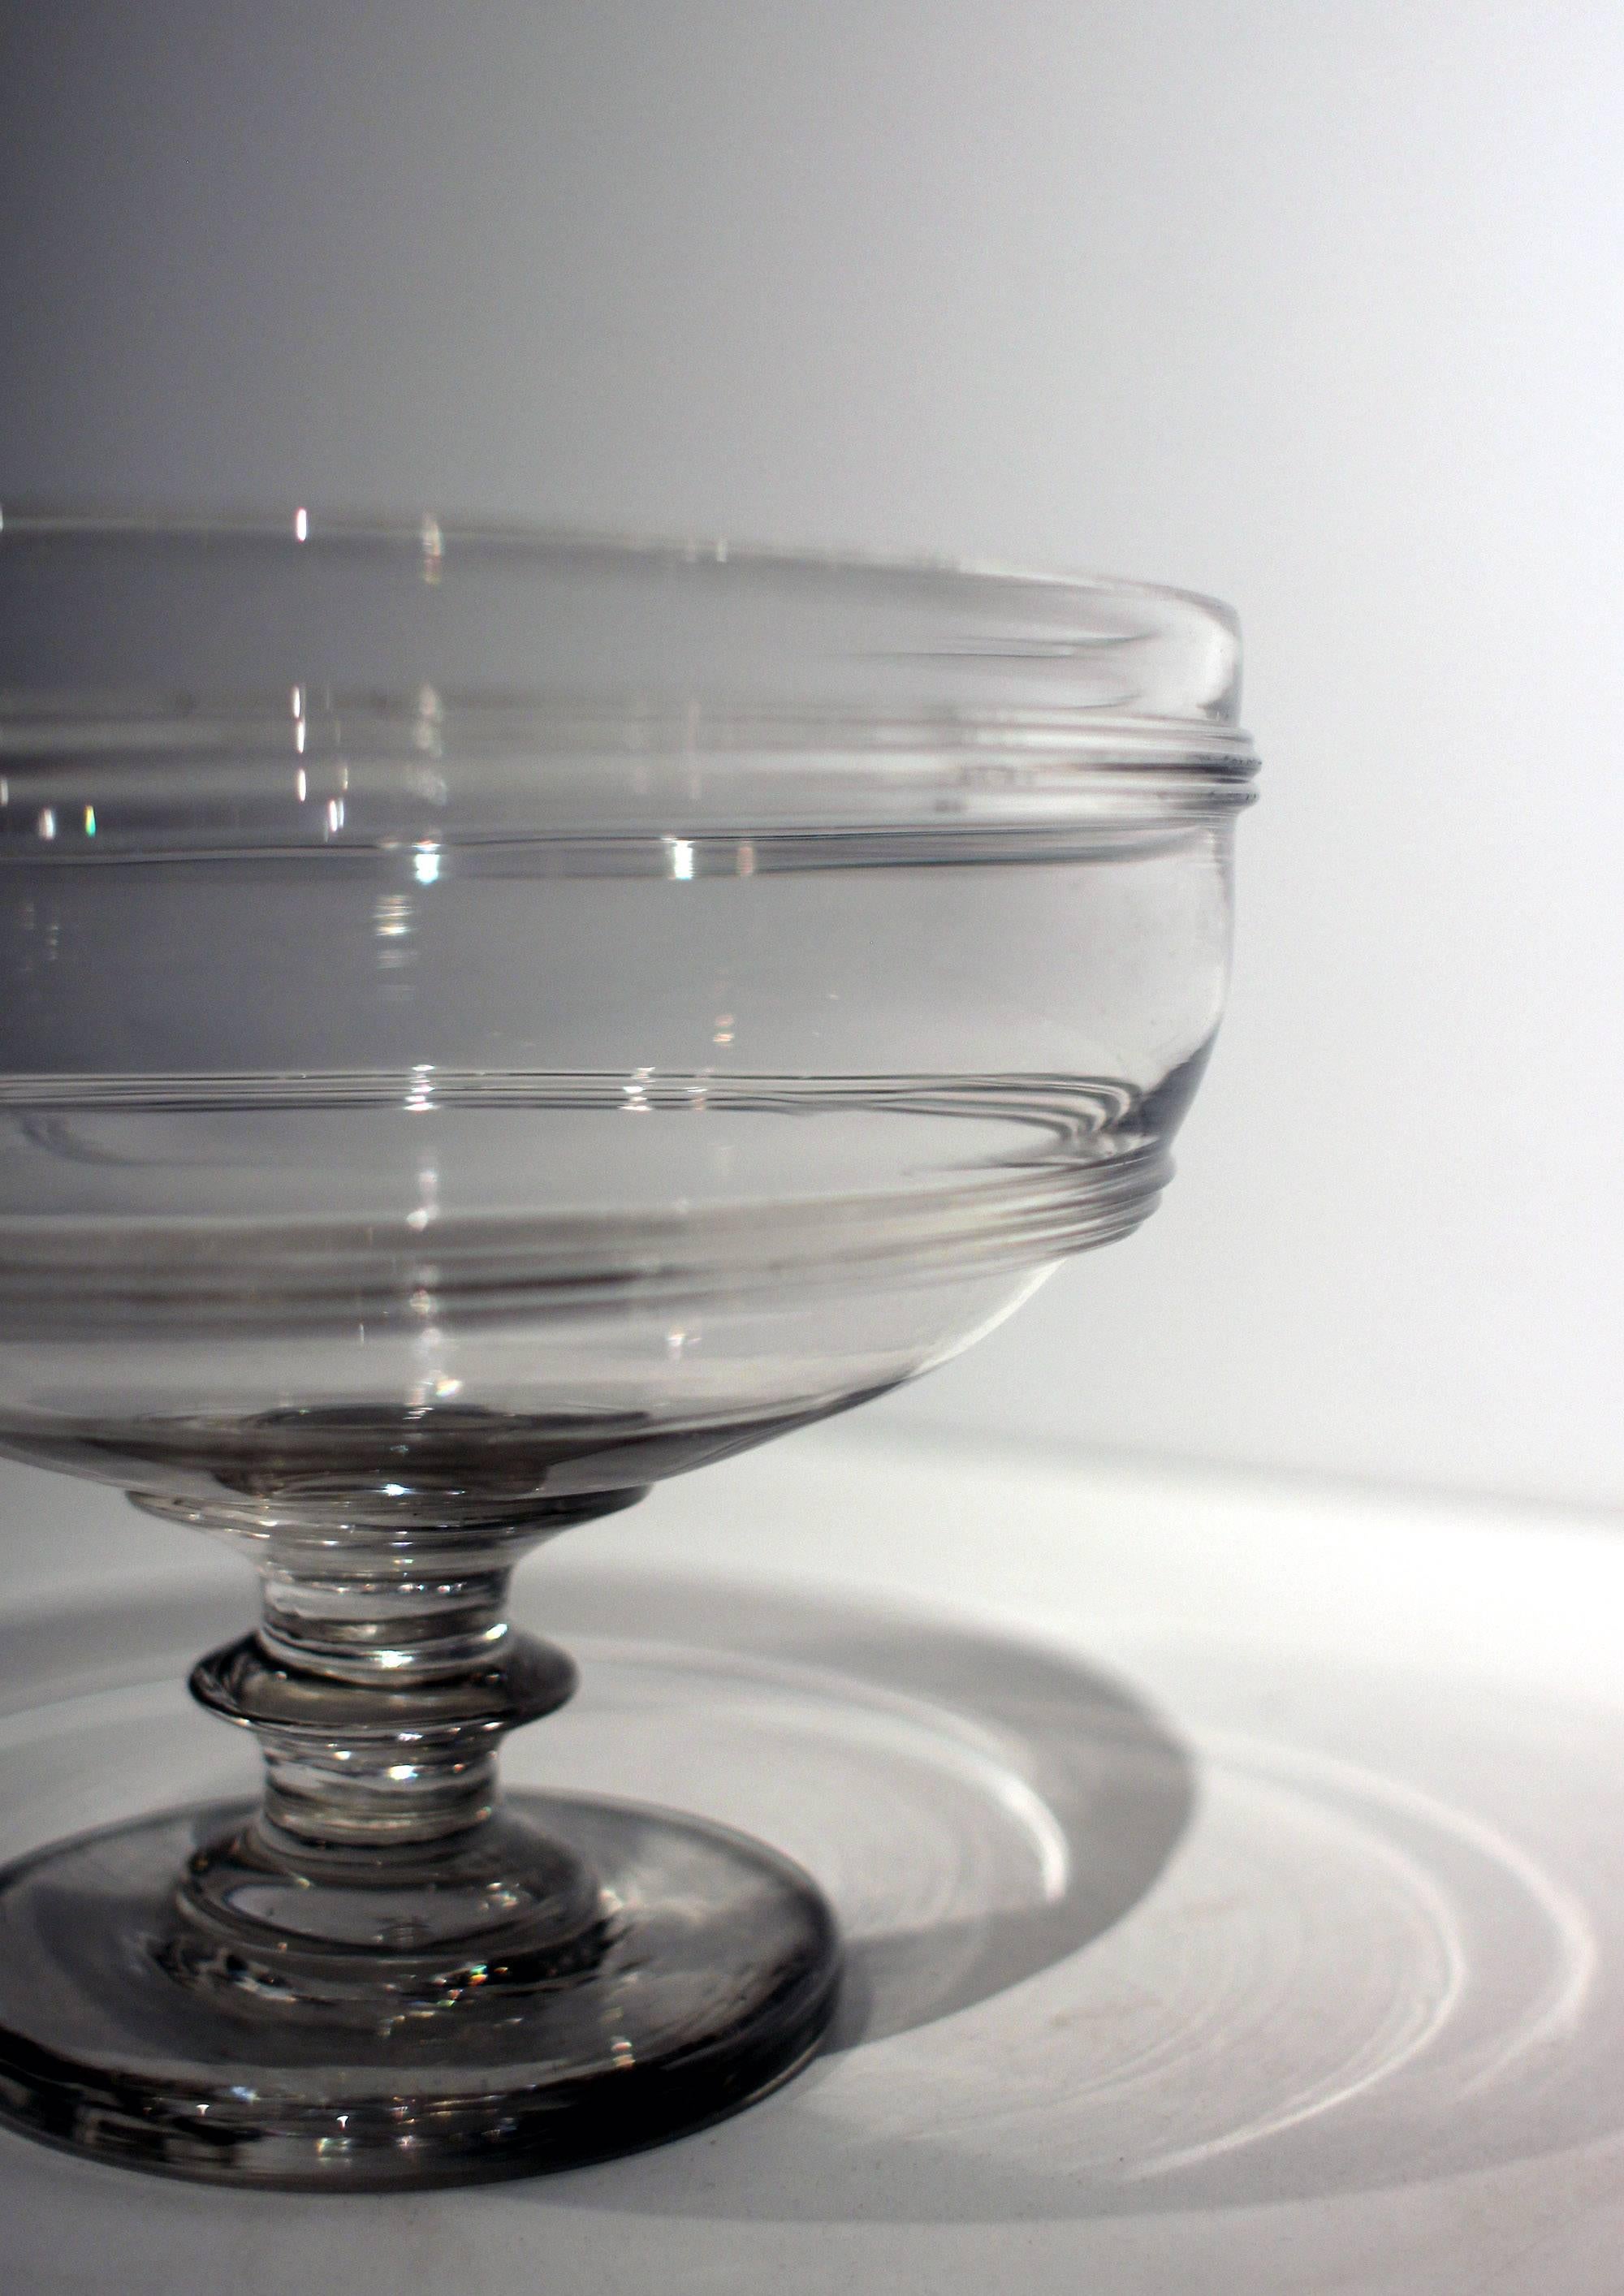 Fine blown glass compote on the heartier side with a deep bowl and unusual ringed detail and an applied base, circa 1830, New England, probably Massachusetts. Very good lines, crisp detail, excellent condition.